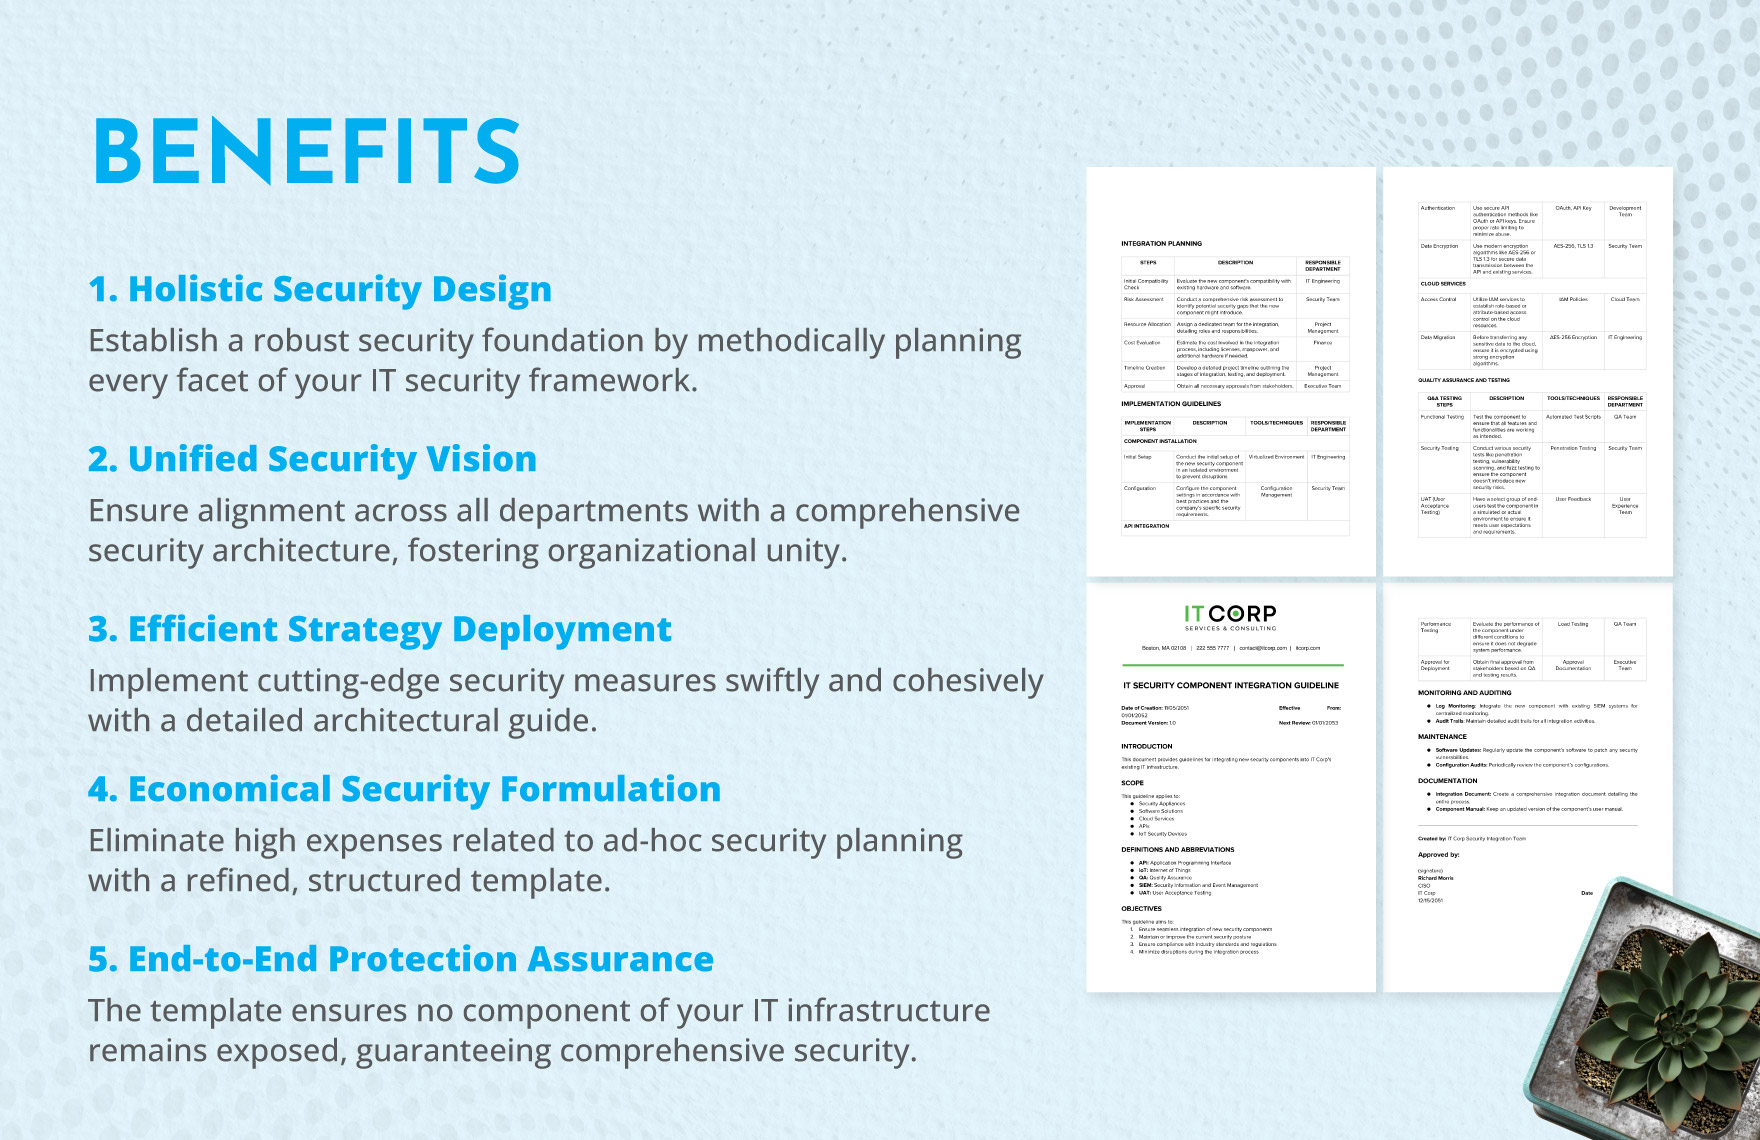 IT Security Component Integration Guideline Template